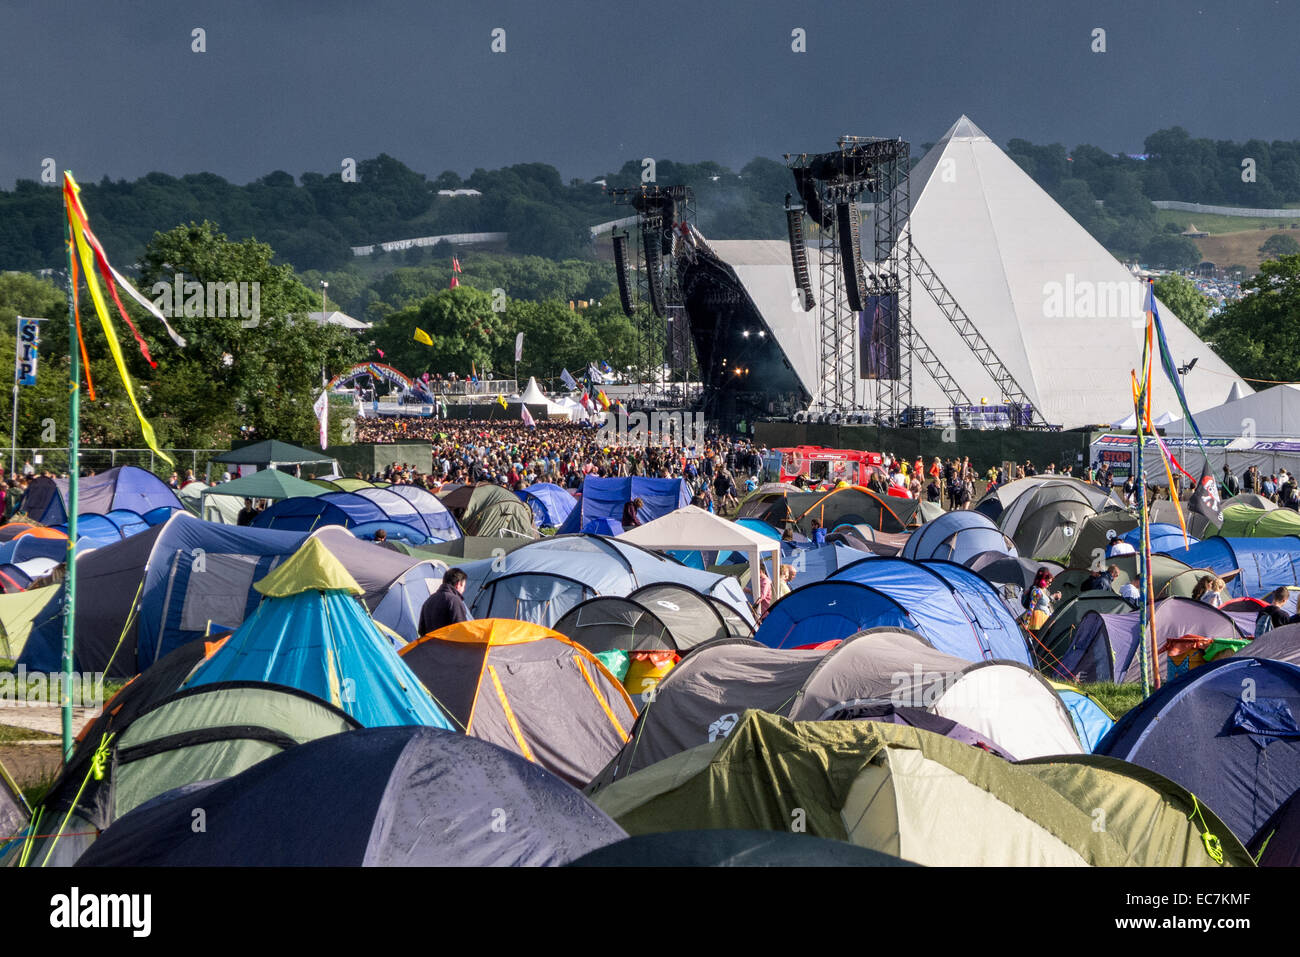 The Pyramid Stage at The Glastonbury Festival in Somerset, England. Stock Photo